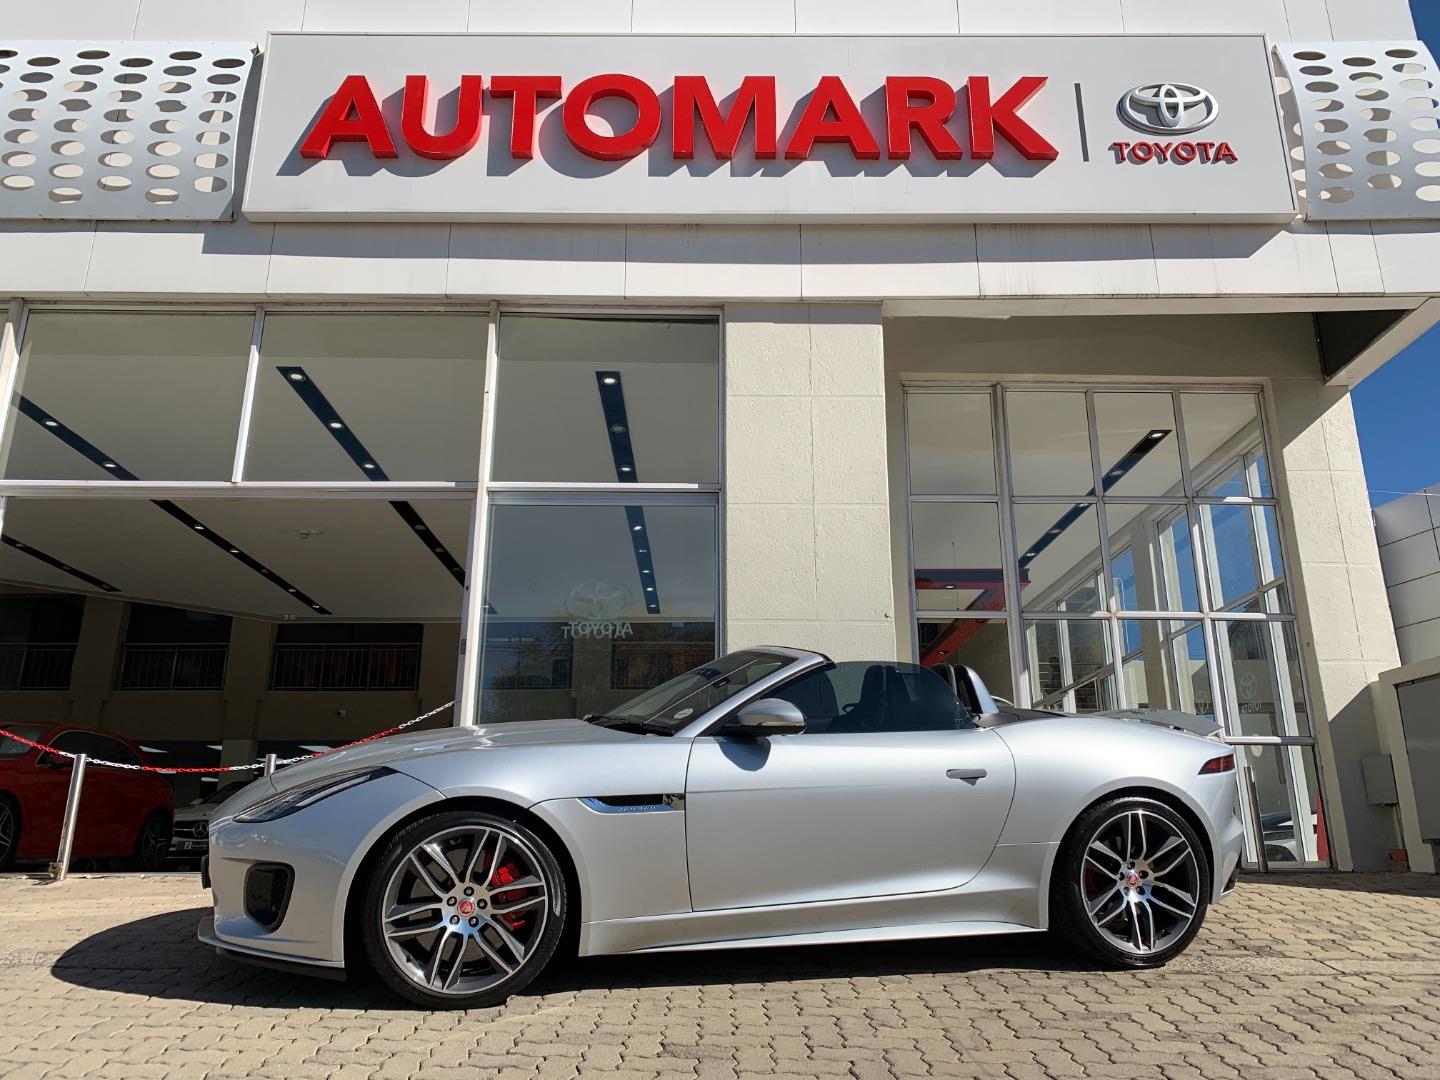 2018 Jaguar F-Type My16 3.0 V6 S Convertible for sale - 343137